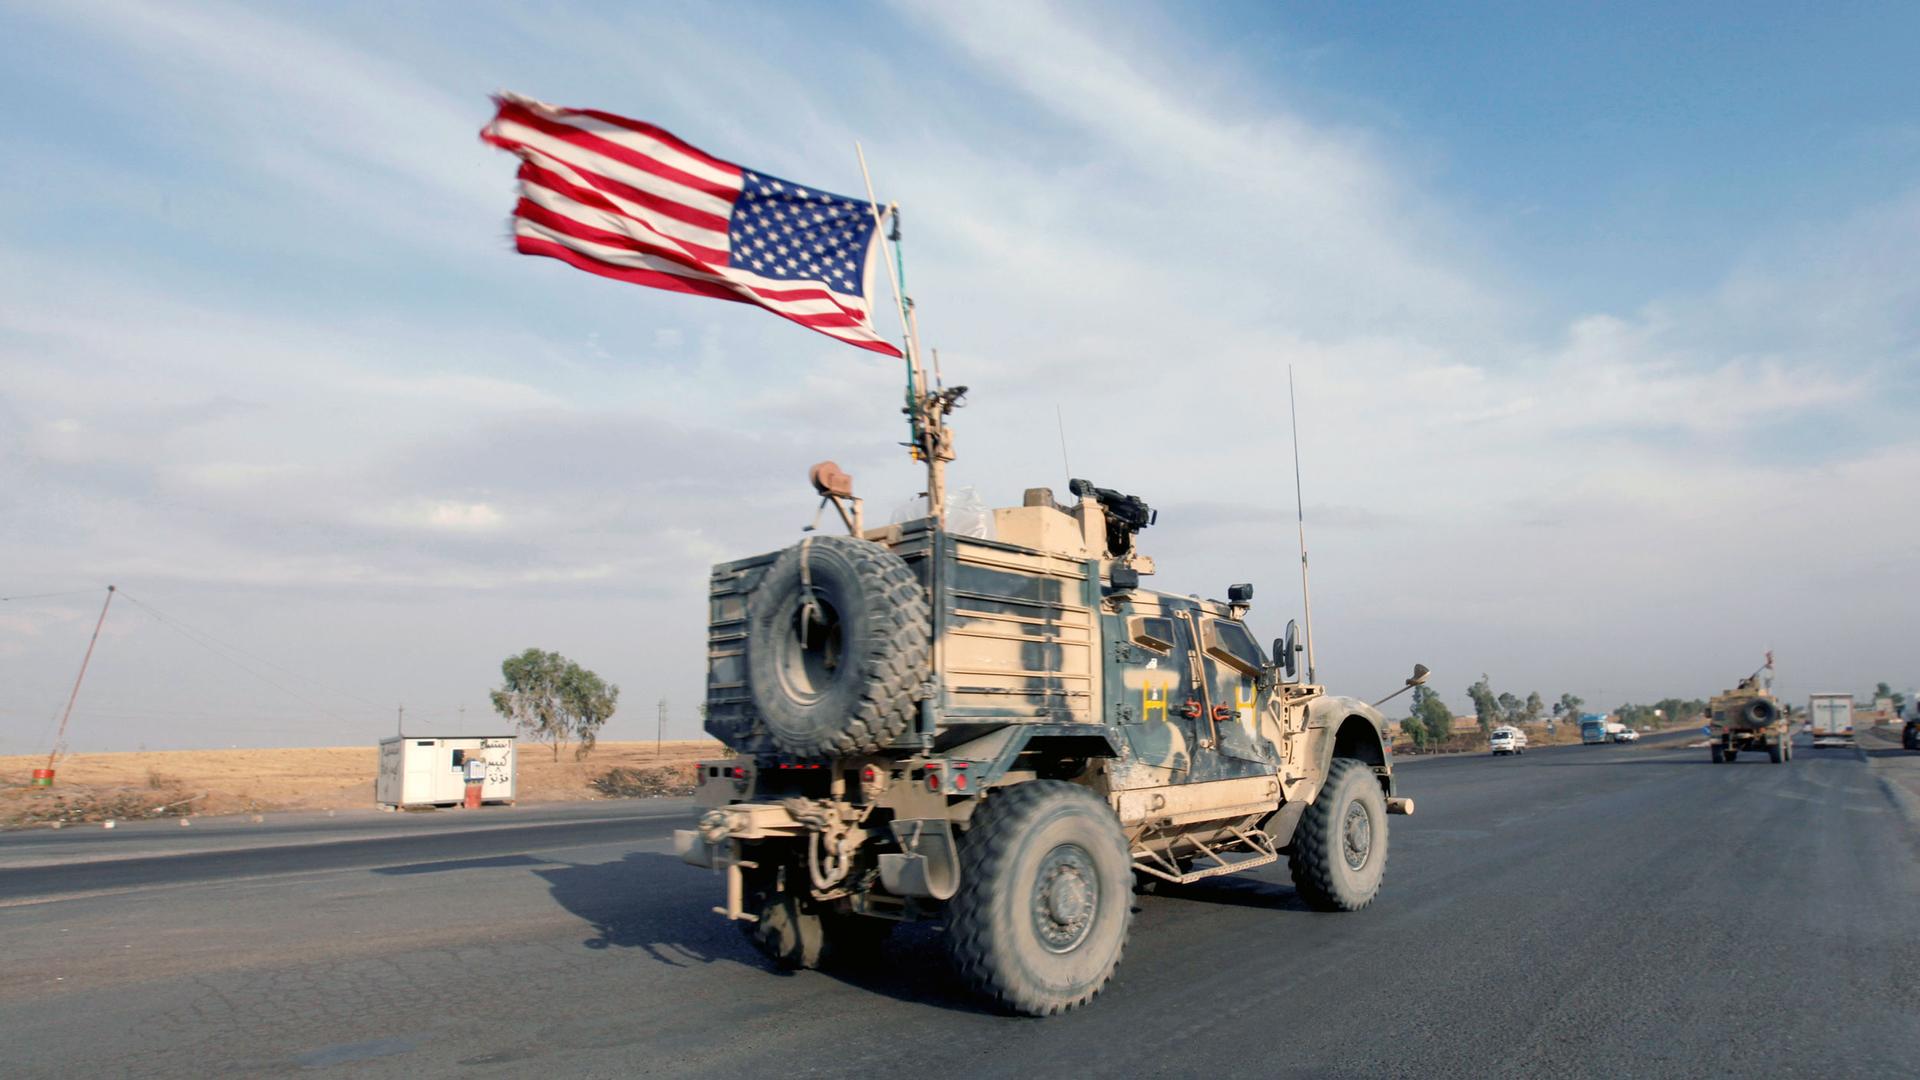 A military truck drives down a road with an American flag blowing in the wind on top of the truck